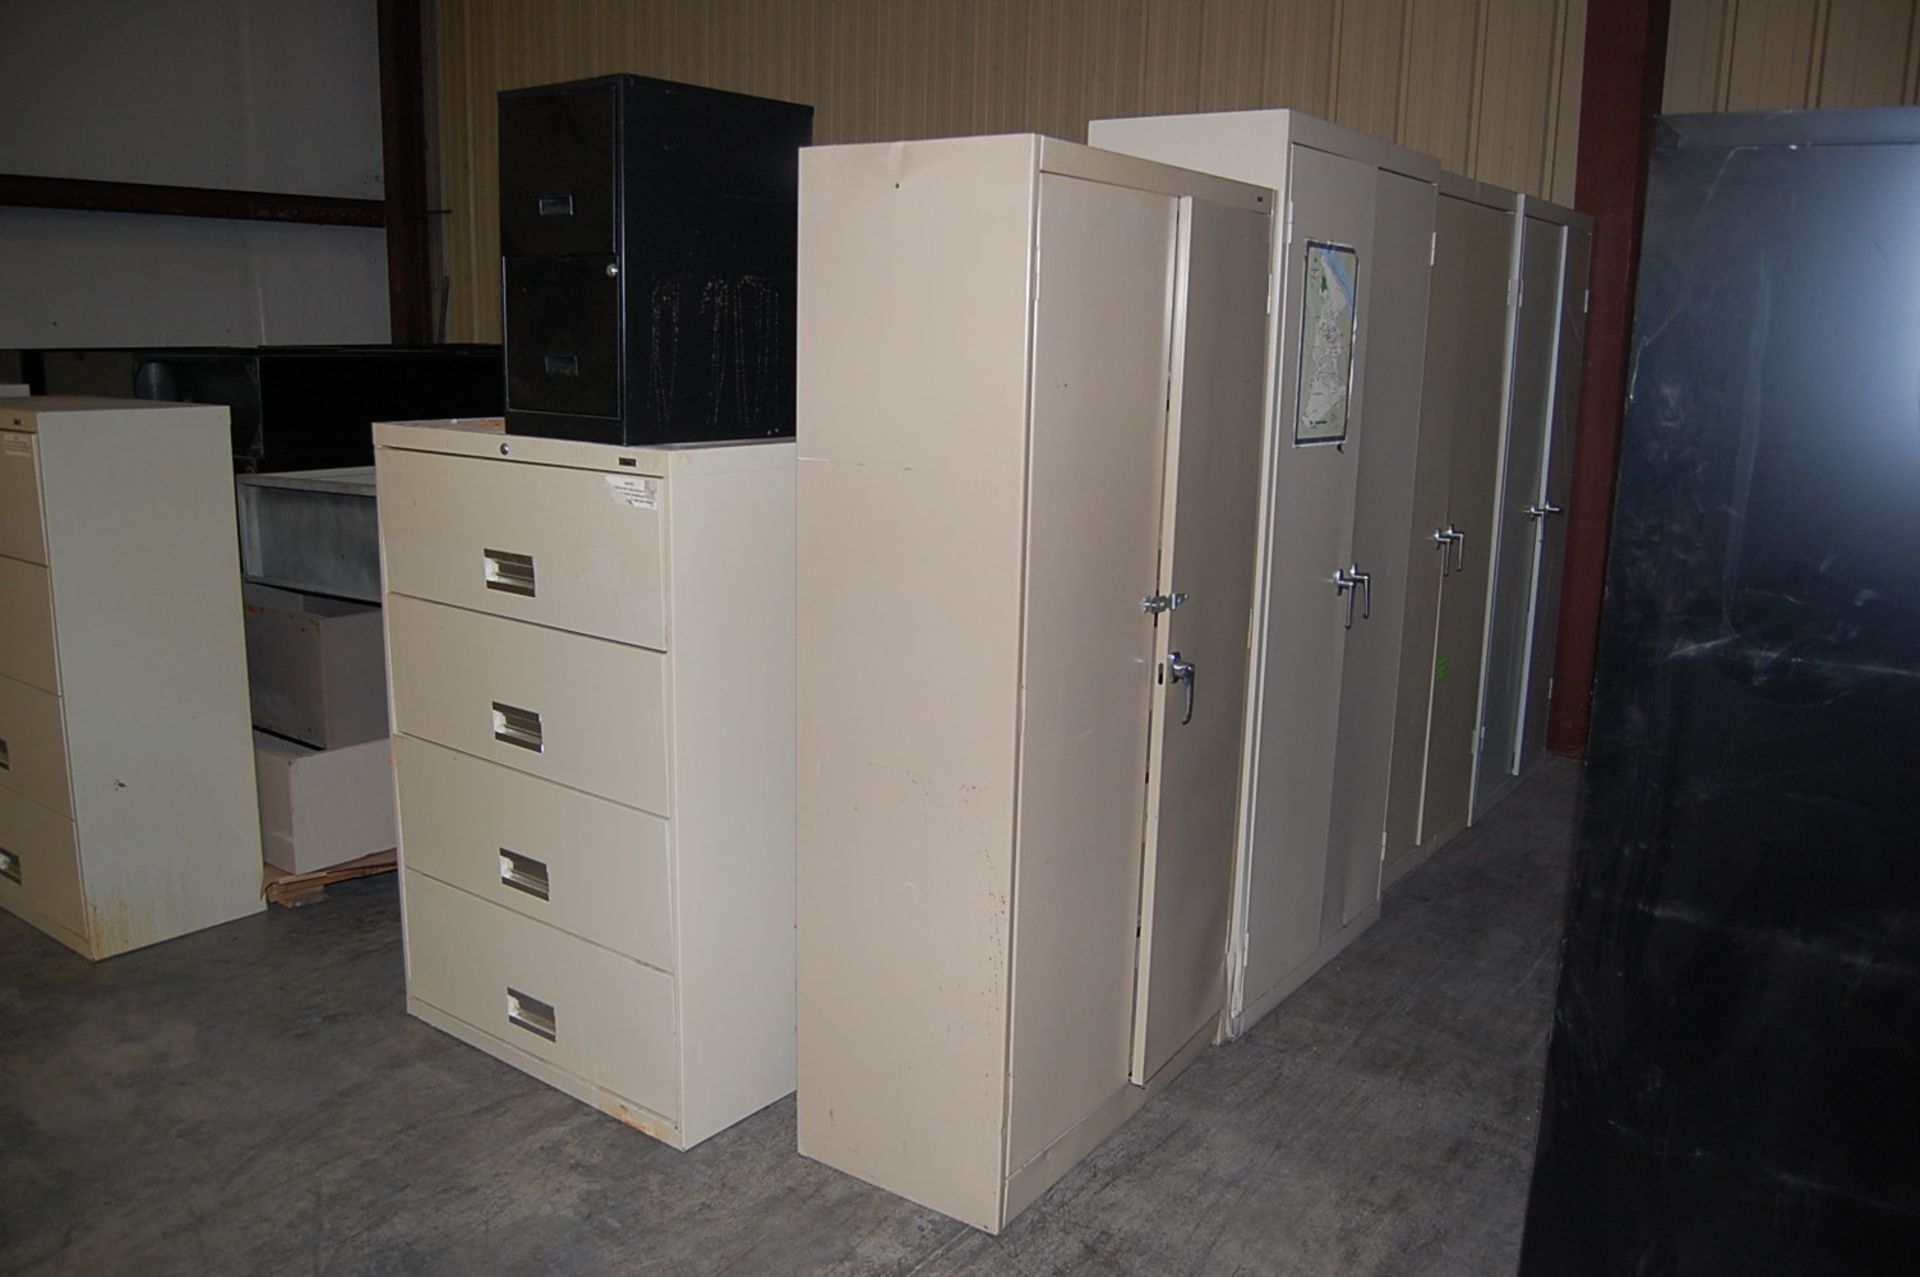 Office Support - (15) 2-Door Cabinets, (2) 4-Drawer Lateral Files, (1) 4-Drawer Vertical File, ( - Image 4 of 4